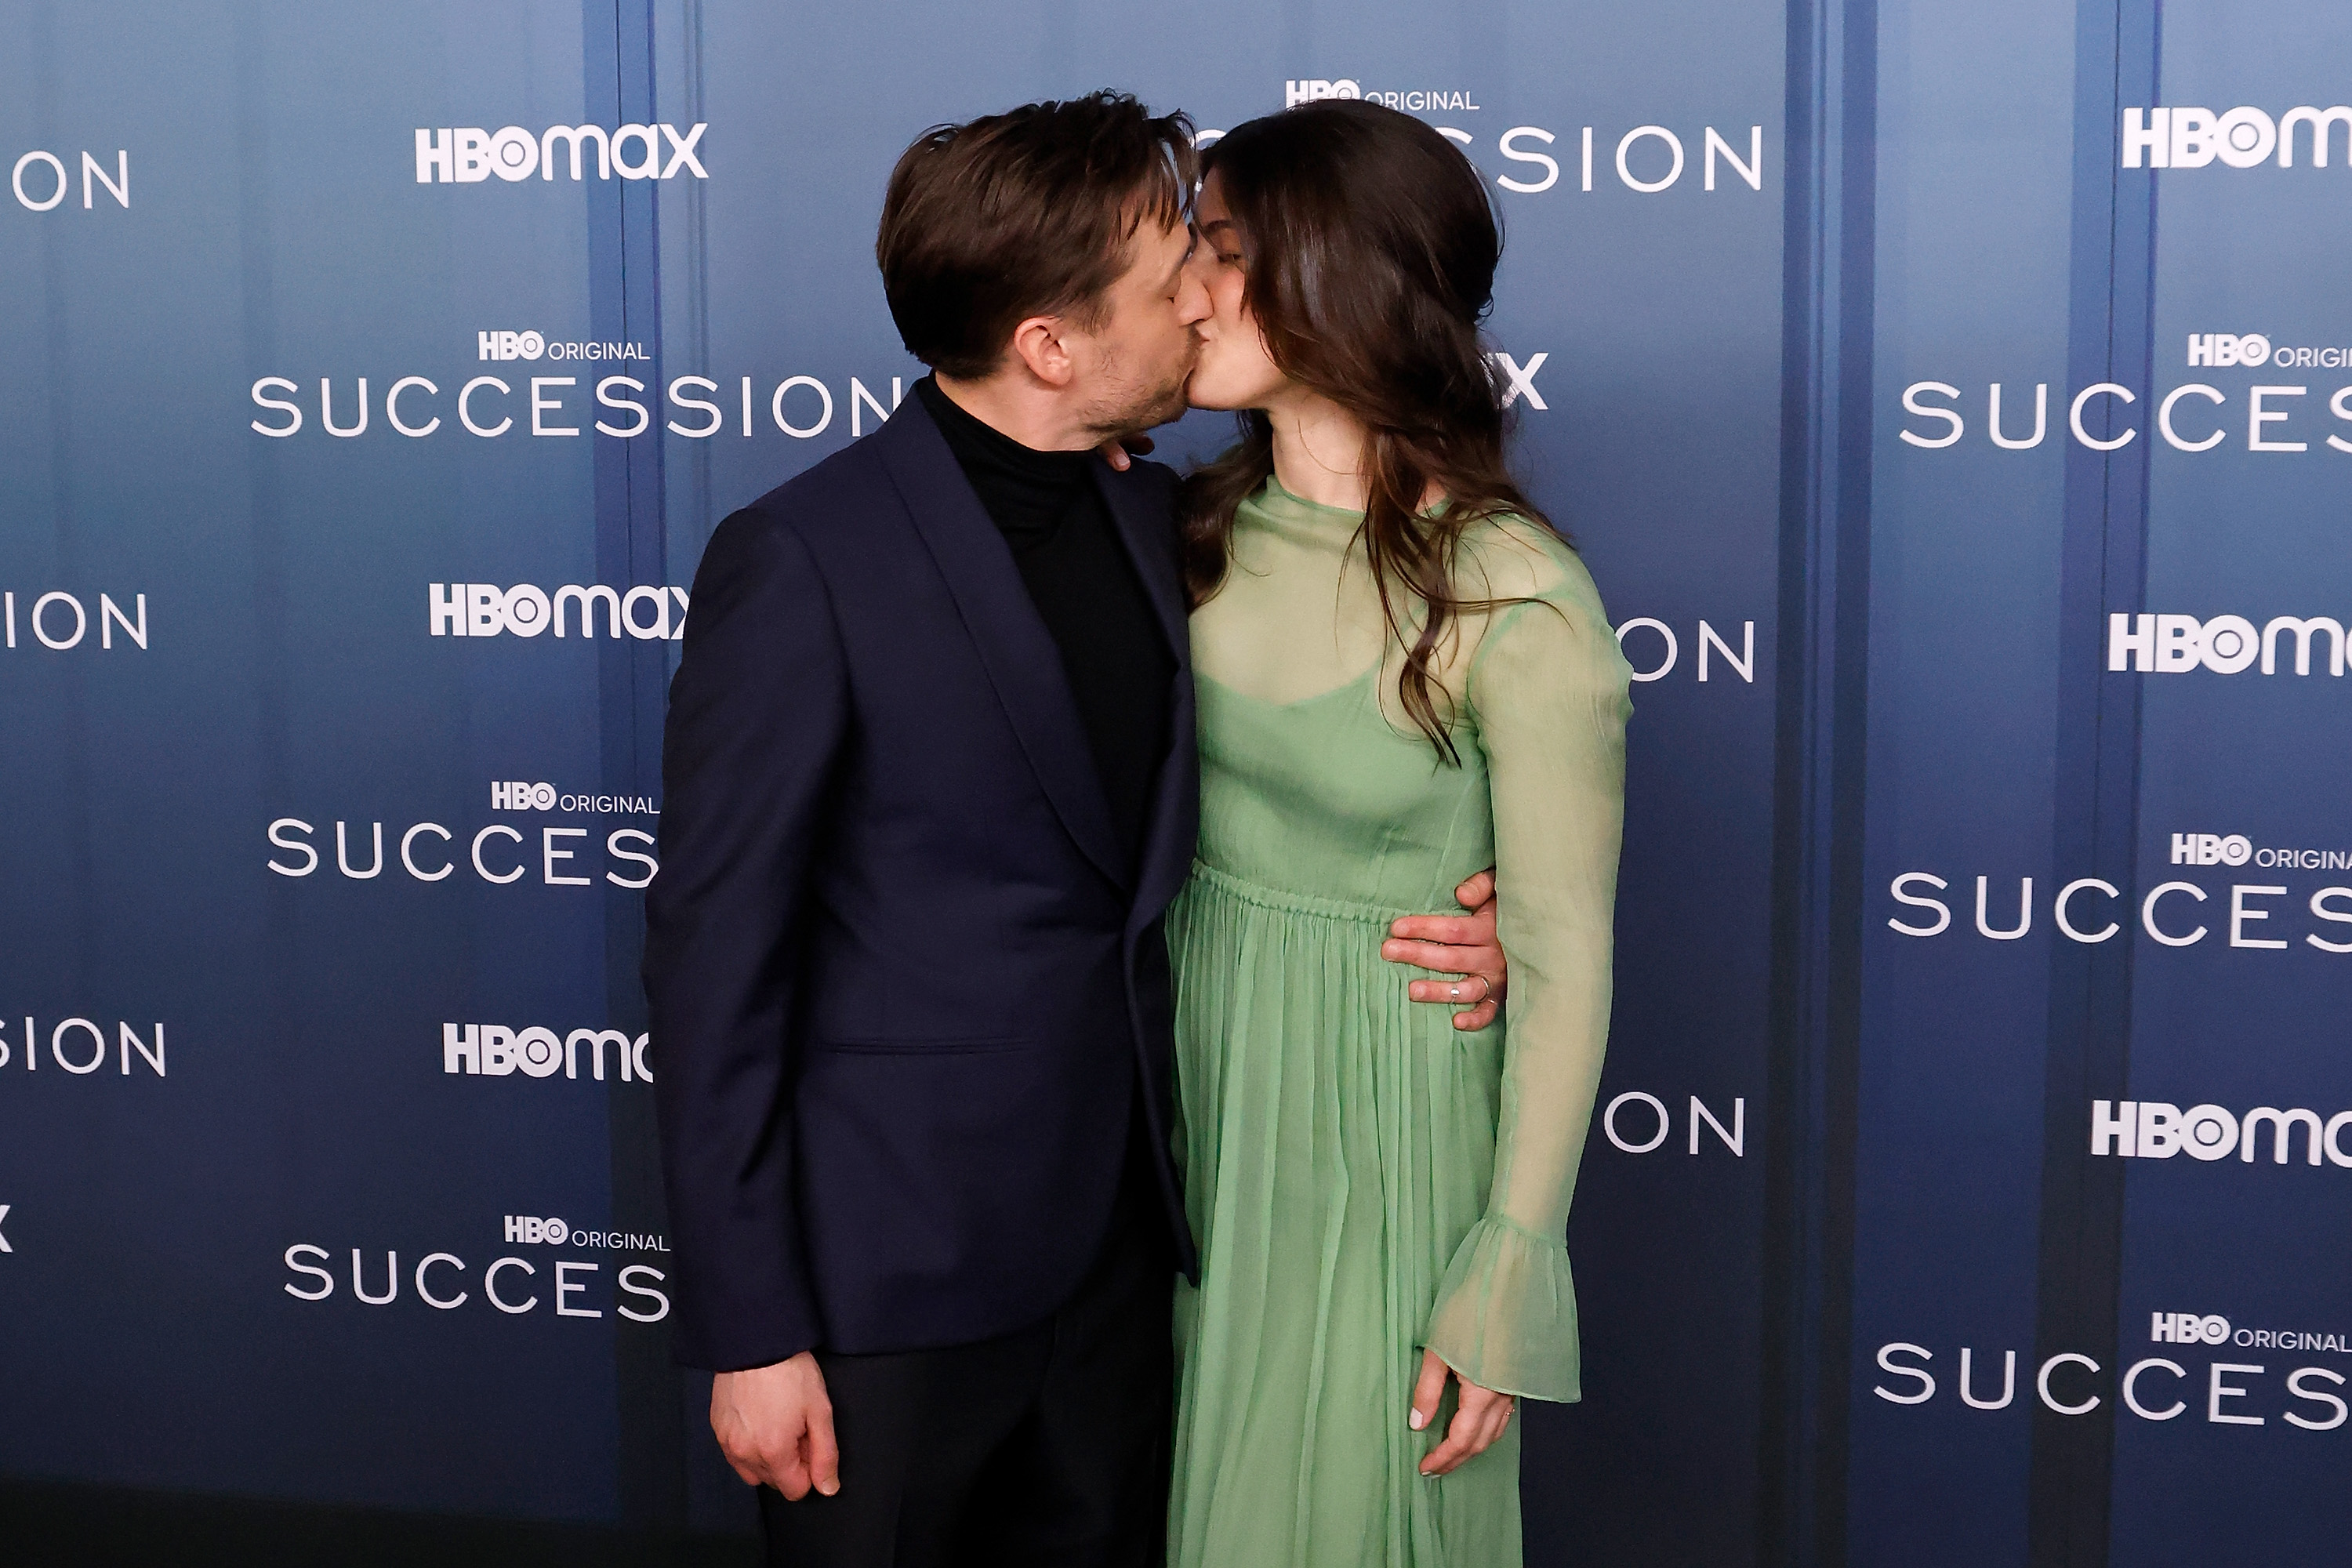 Kieran Culkin and his wife Jazz Charton attend the Season 4 premiere of "Succession" on March 20, 2023 in New York City | Source: Getty Images